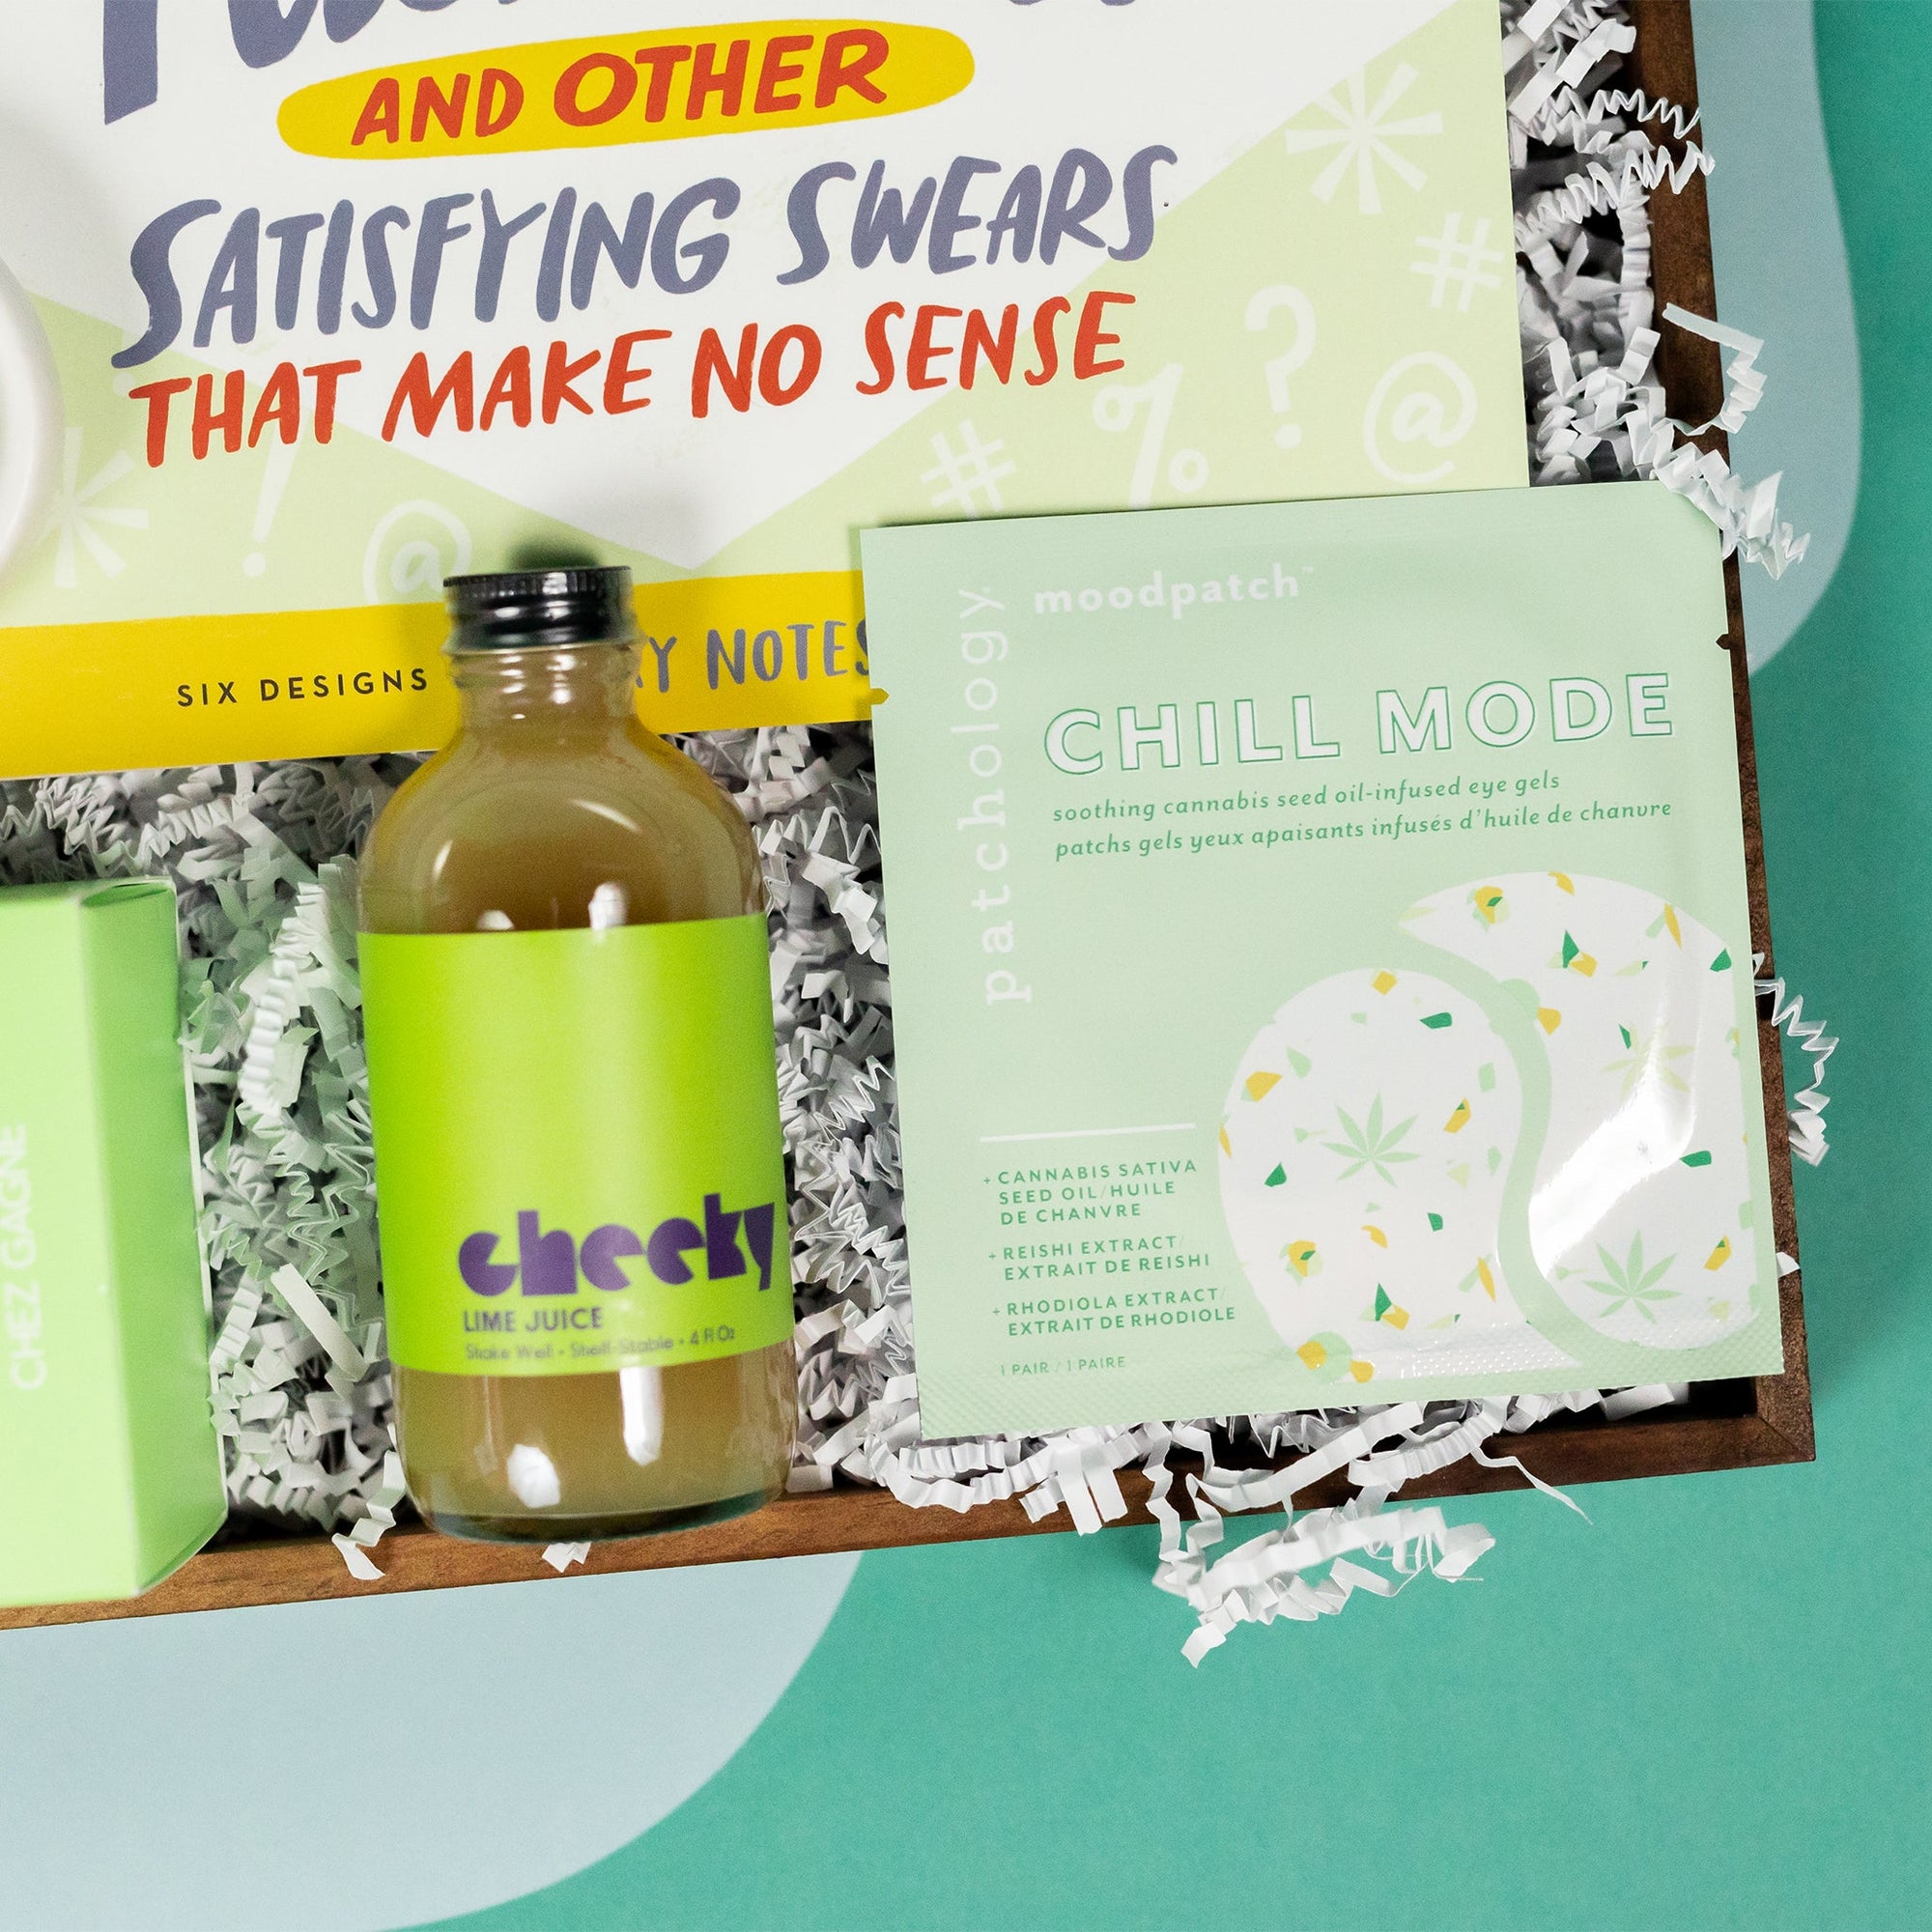 On a cool green and blue wavy background sits a wooden tray of gifts on white paper krinkle. This photo is a close-up on the mini bottle of Cheeky Lime Juice for cocktails, and a Patchology Chill Mode soothing cannabis oil under eye gel patches. Both have light green in the packaging and look cute together.